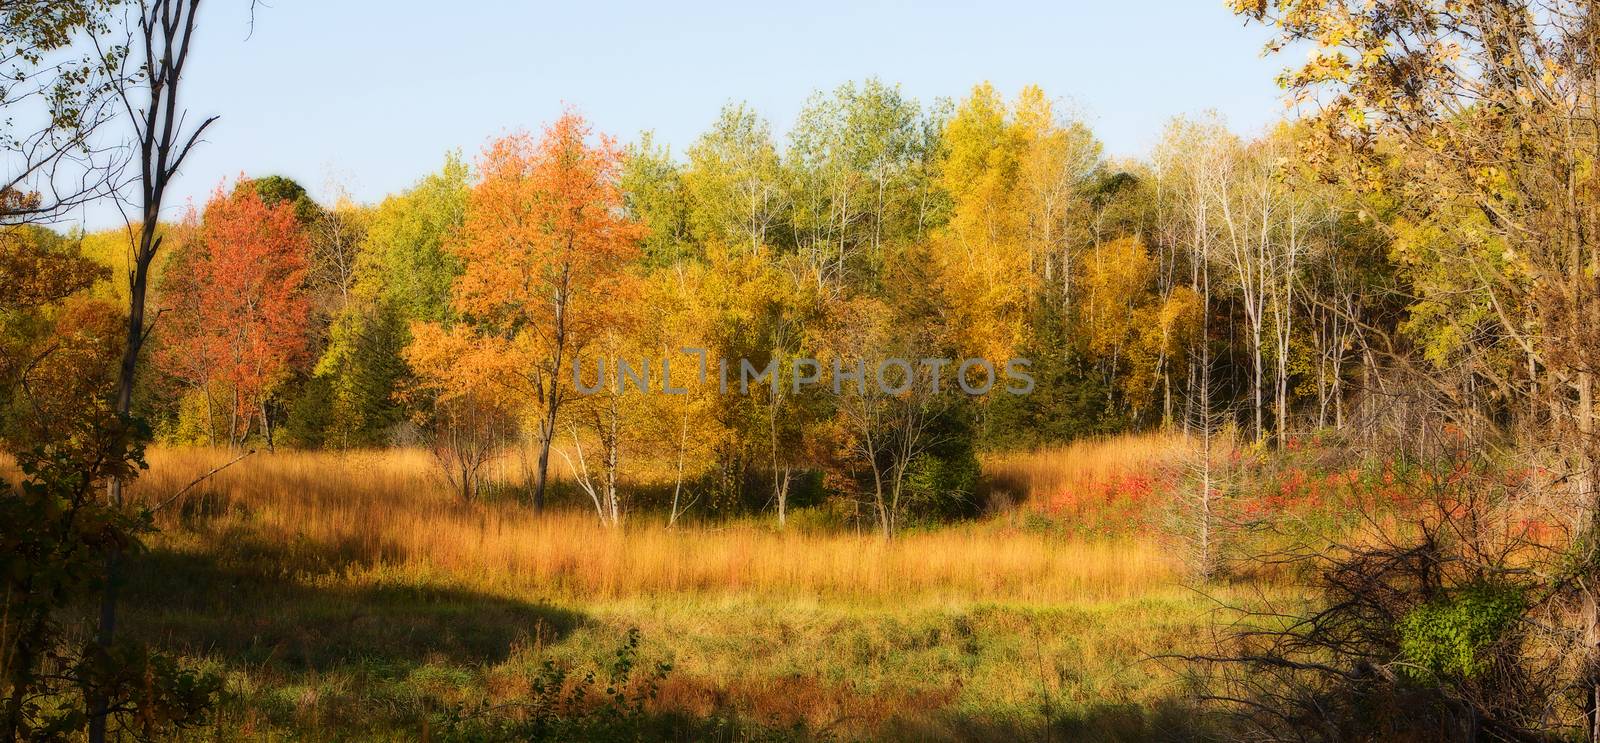 Colorful scenic Landscape in HDR in soft focus by Coffee999